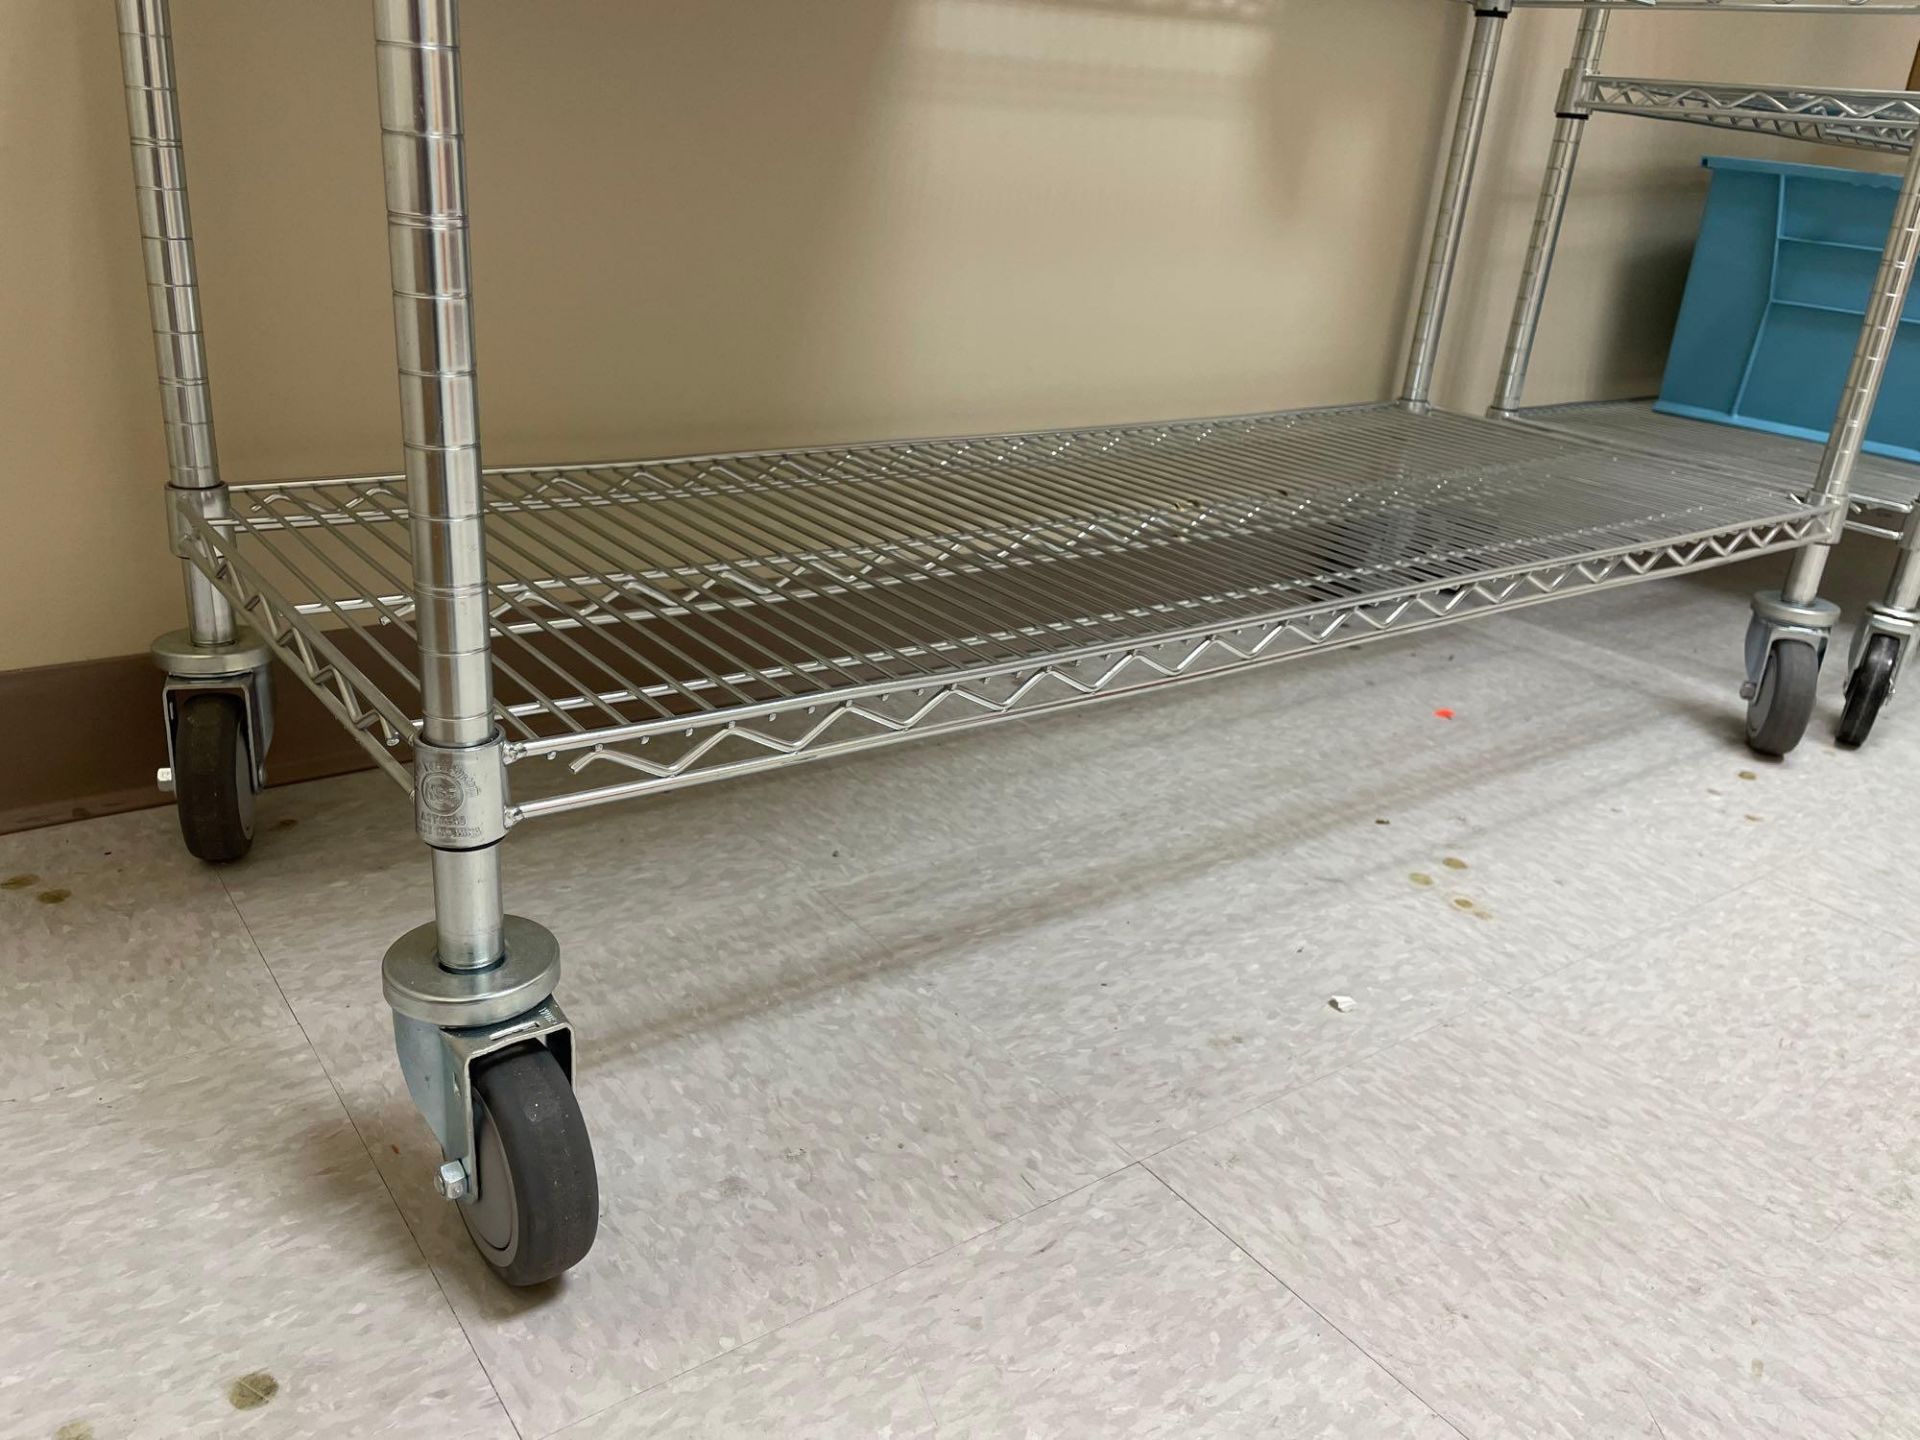 5-Tier Wire Shelving Unit on Casters - Image 2 of 3